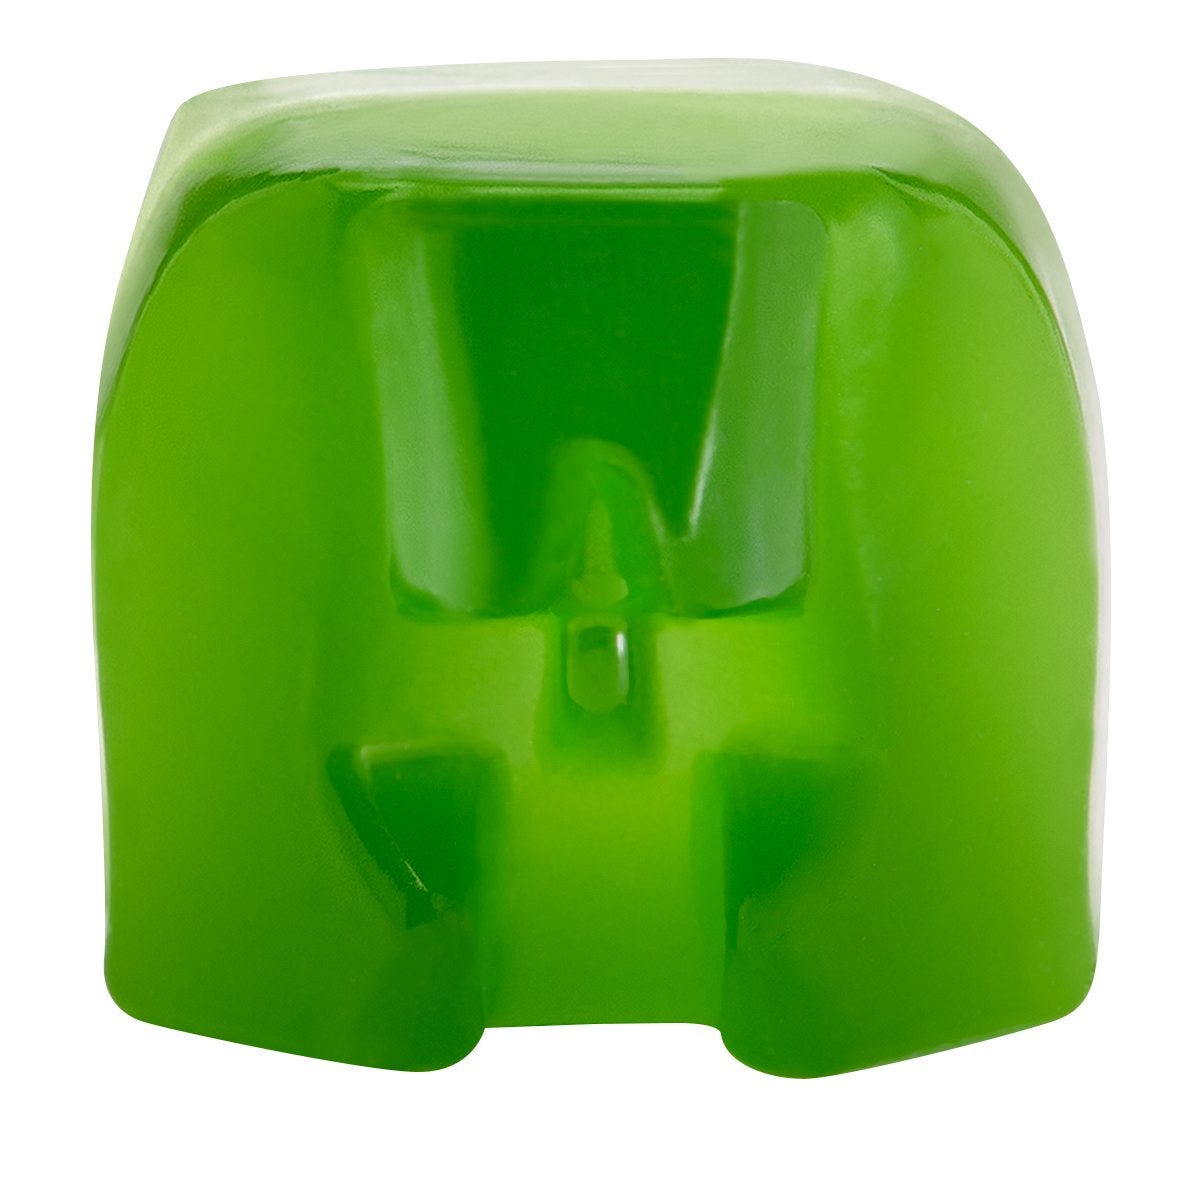 Cucumber & Aloe Fragrance Flame™ Petite Wax Melts - PartyLite US